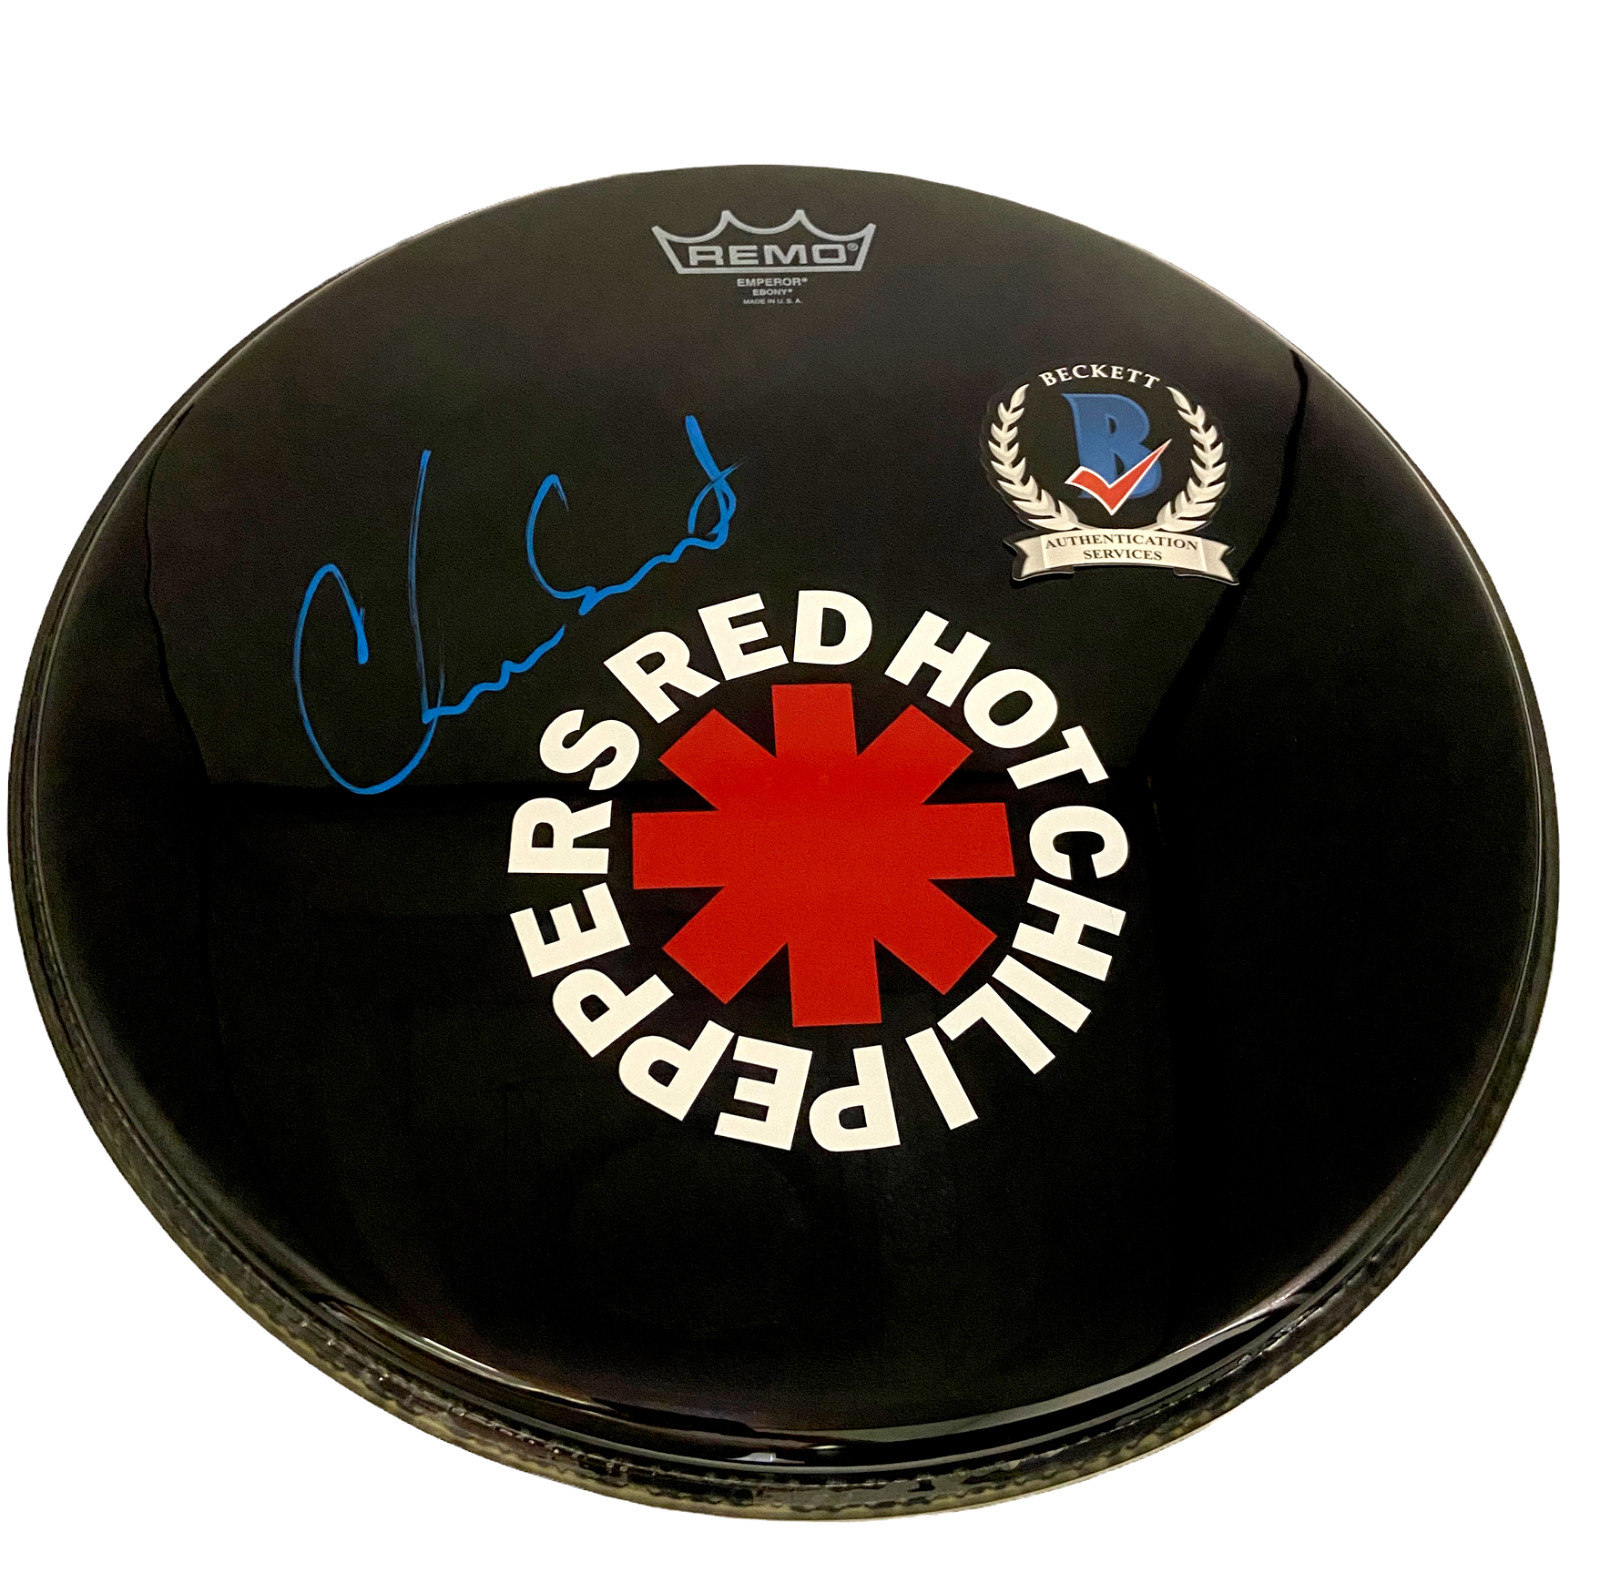 CHAD SMITH SIGNED AUTOGRAPH DRUM HEAD - RED HOT CHILI PEPPERS BECKETT BAS COA 